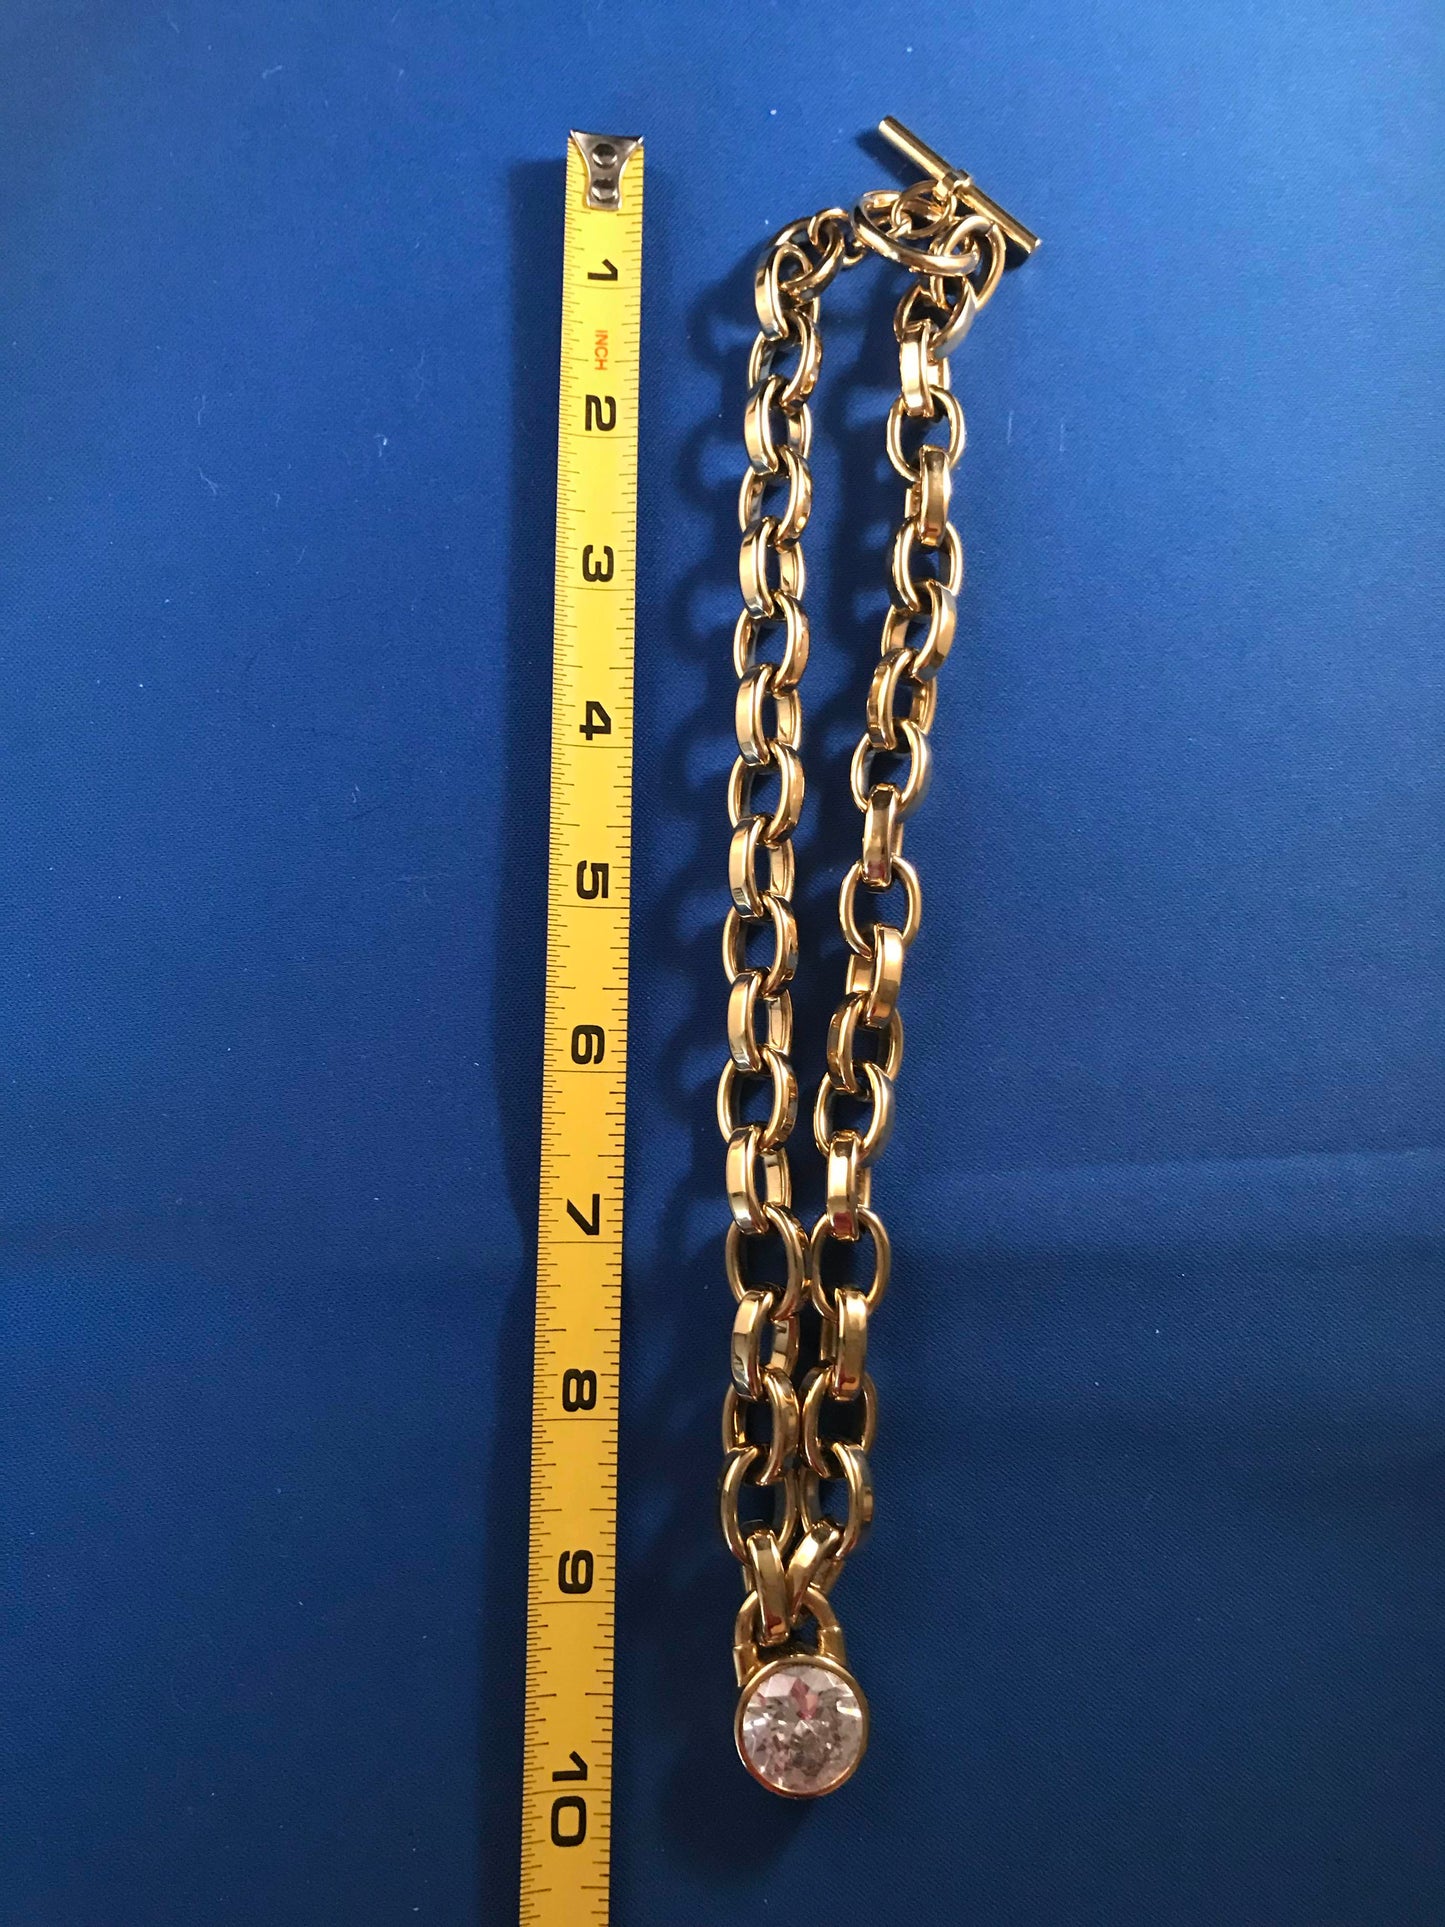 Michael Kors Gold Tone Linked Chain Necklace With Crystal Pendant